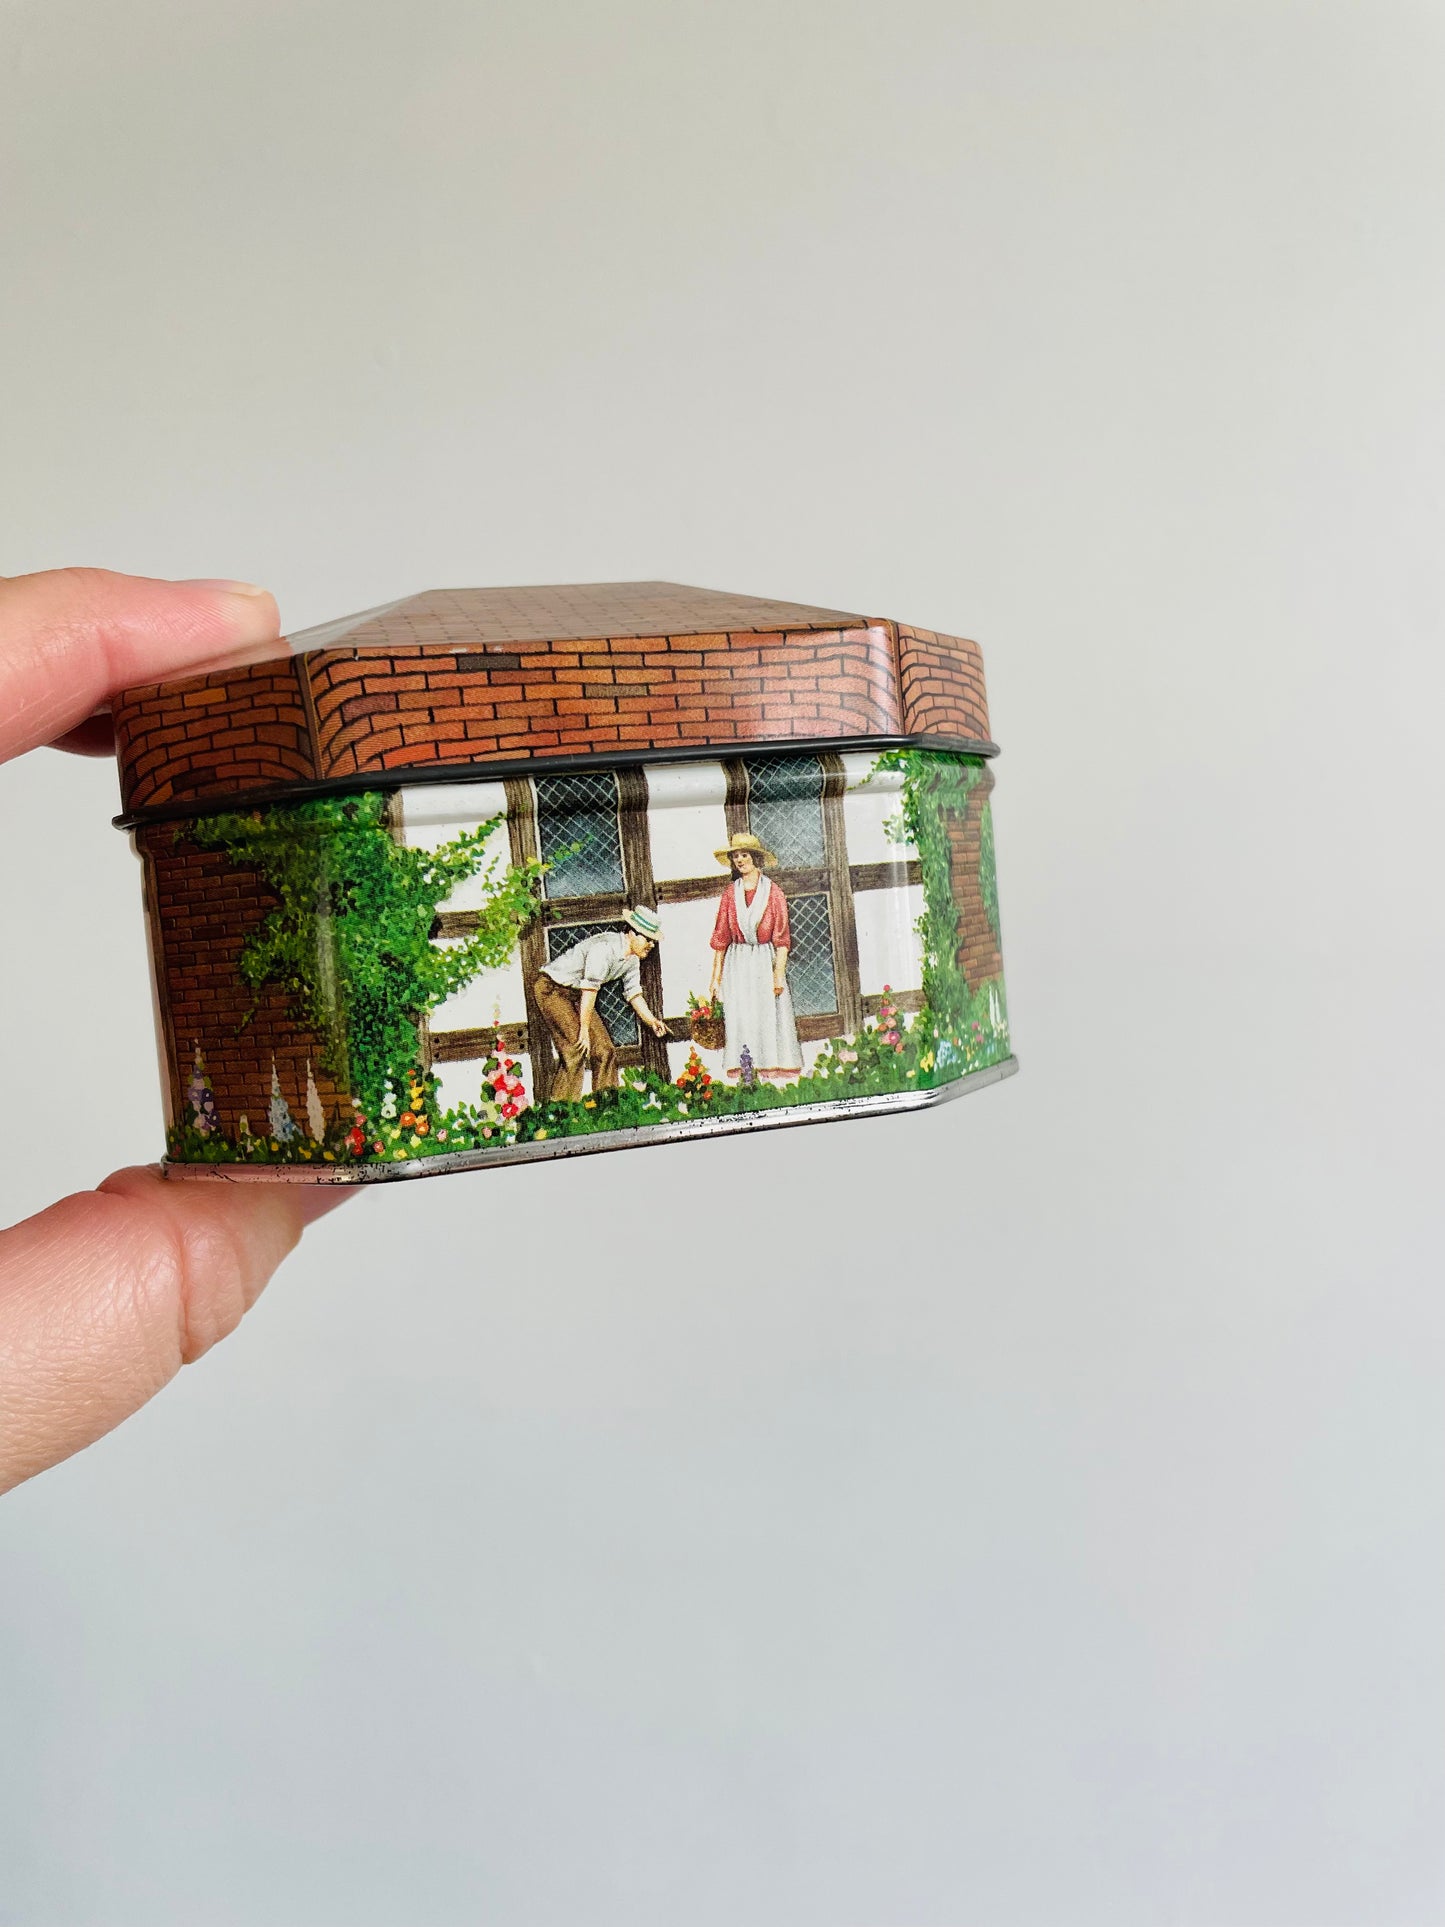 National Trust Cottage No. 4 Tin with Lid - Ian Logan Ltd. London, Illustrated by Bill Dare - 1983